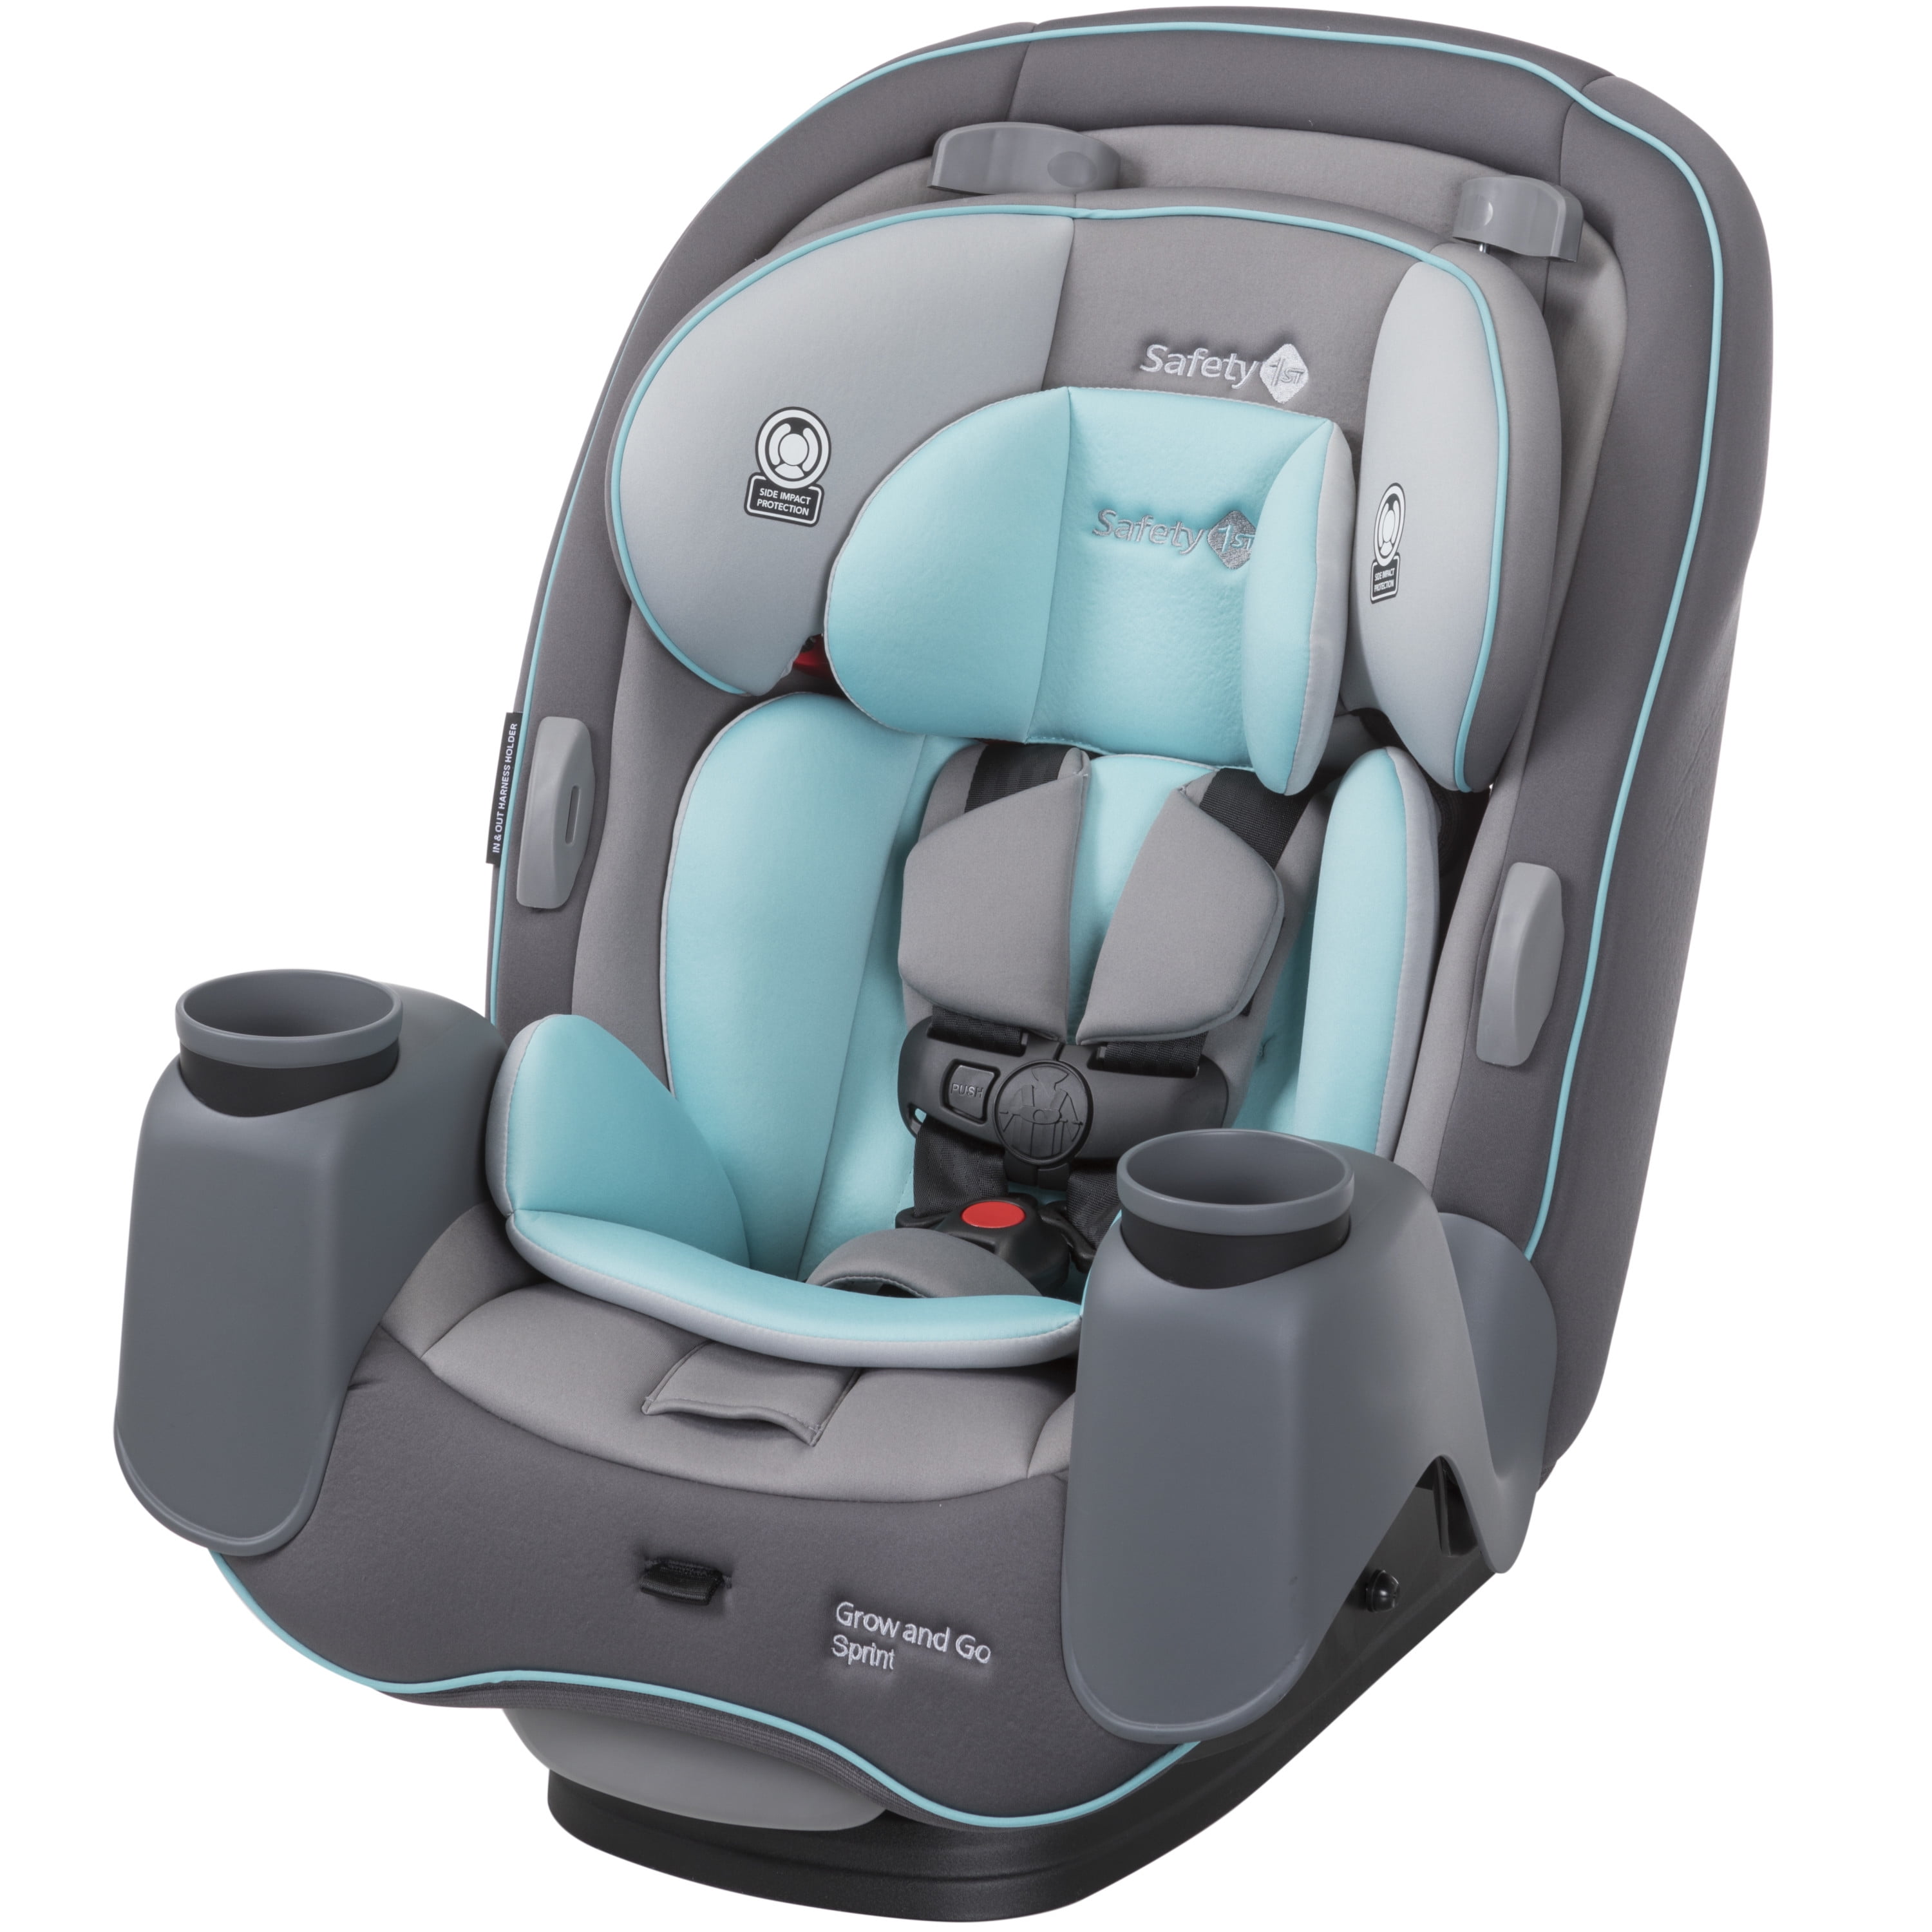 Convertible Car Seat Seafarer, Safety First Grow And Go 3 In 1 Car Seat Reviews